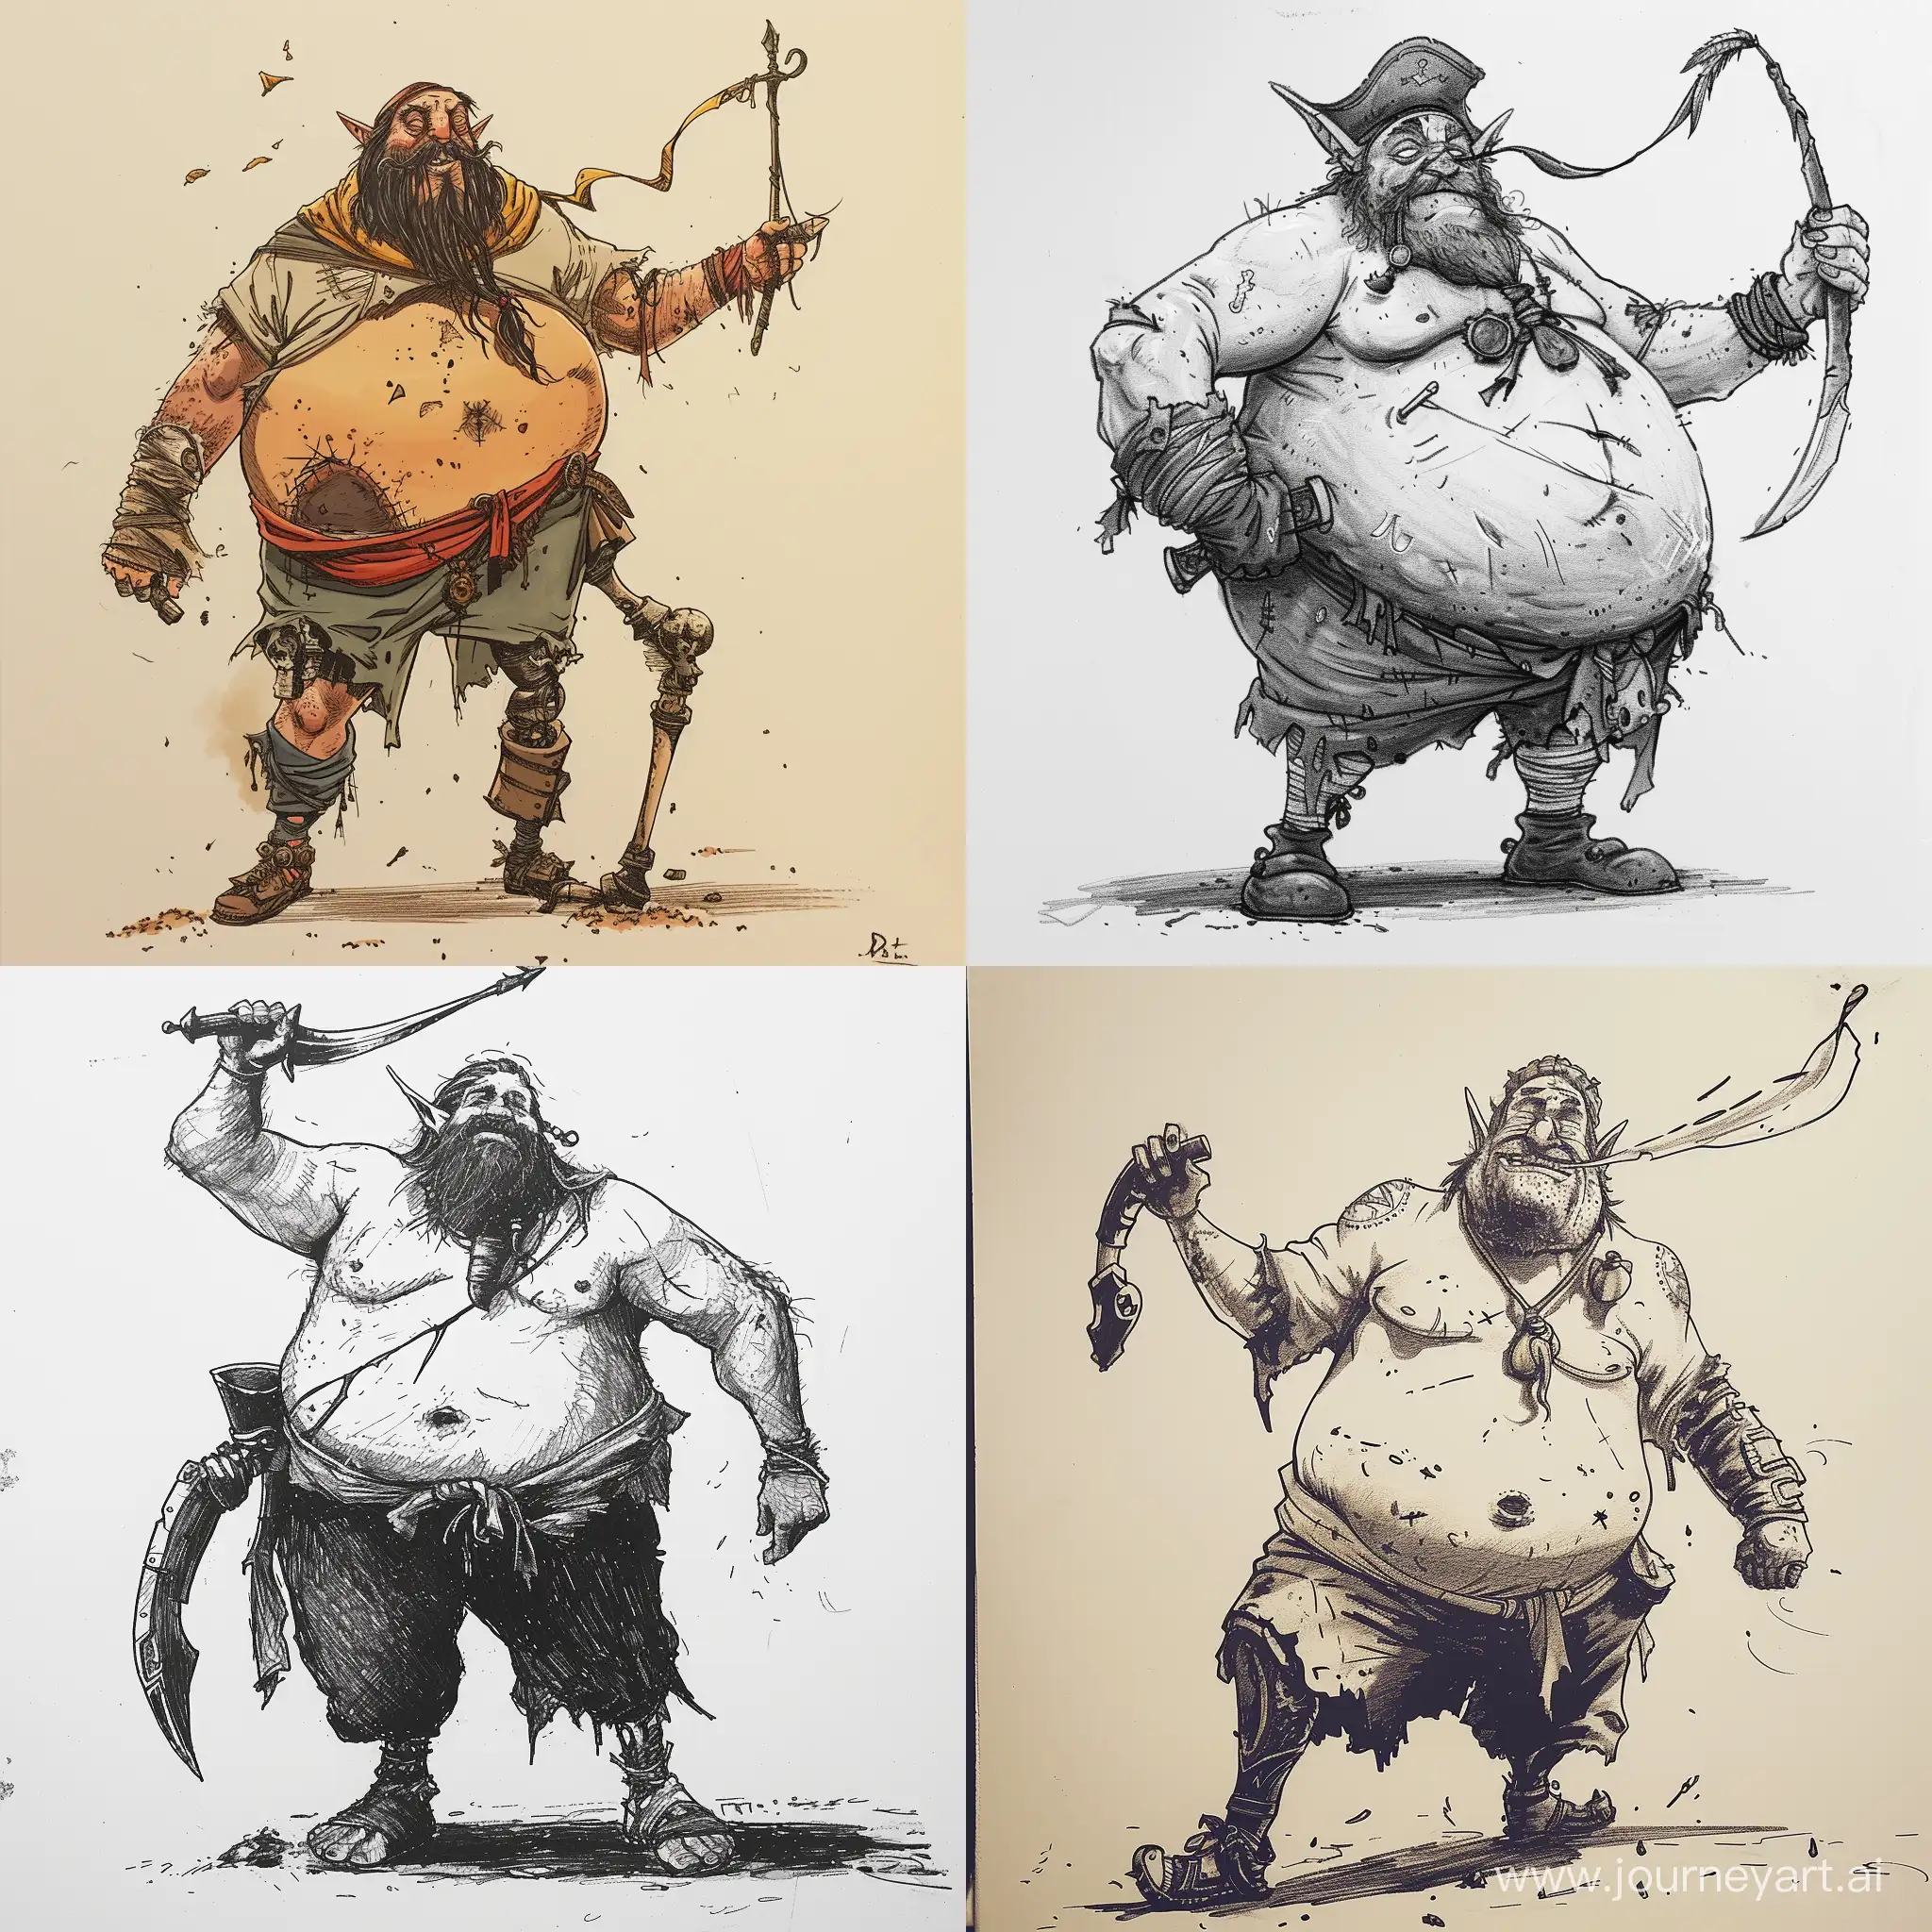 Draw a fat pirate, in rags, with a prosthetic leg, half elf, with a scimitar blown into the air